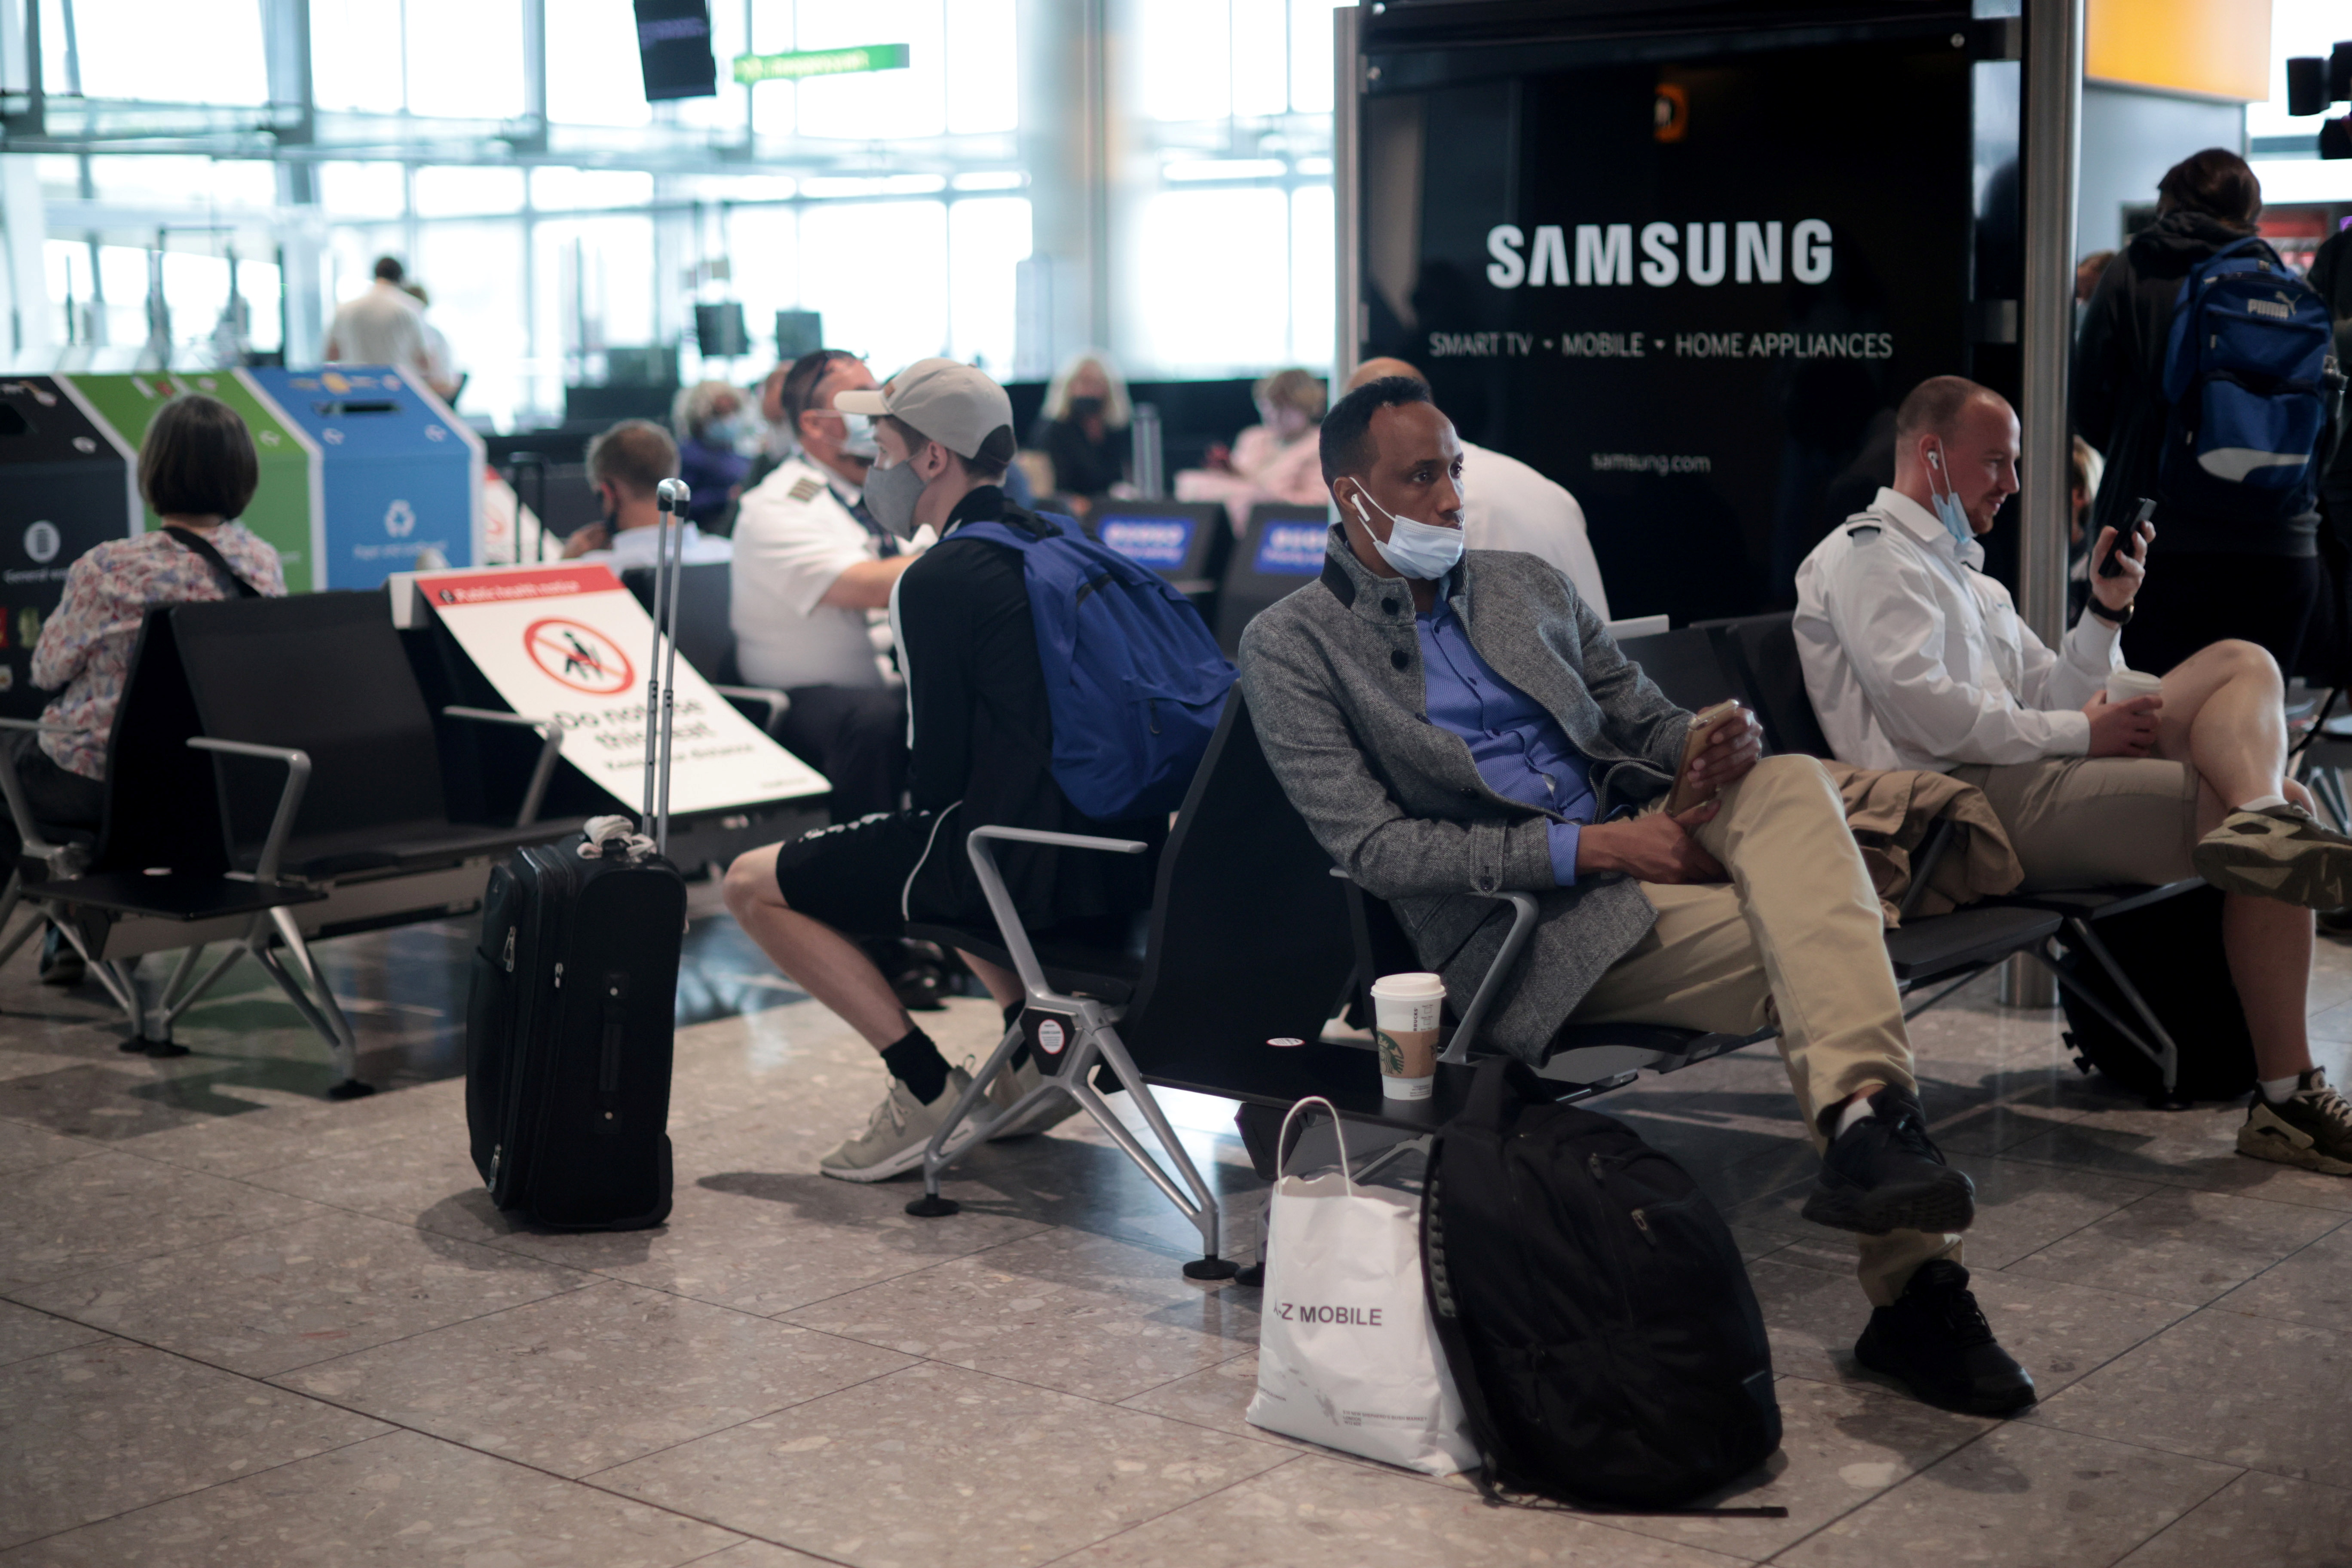 Passengers wait at the Terminal 5 departures area at Heathrow Airport in London